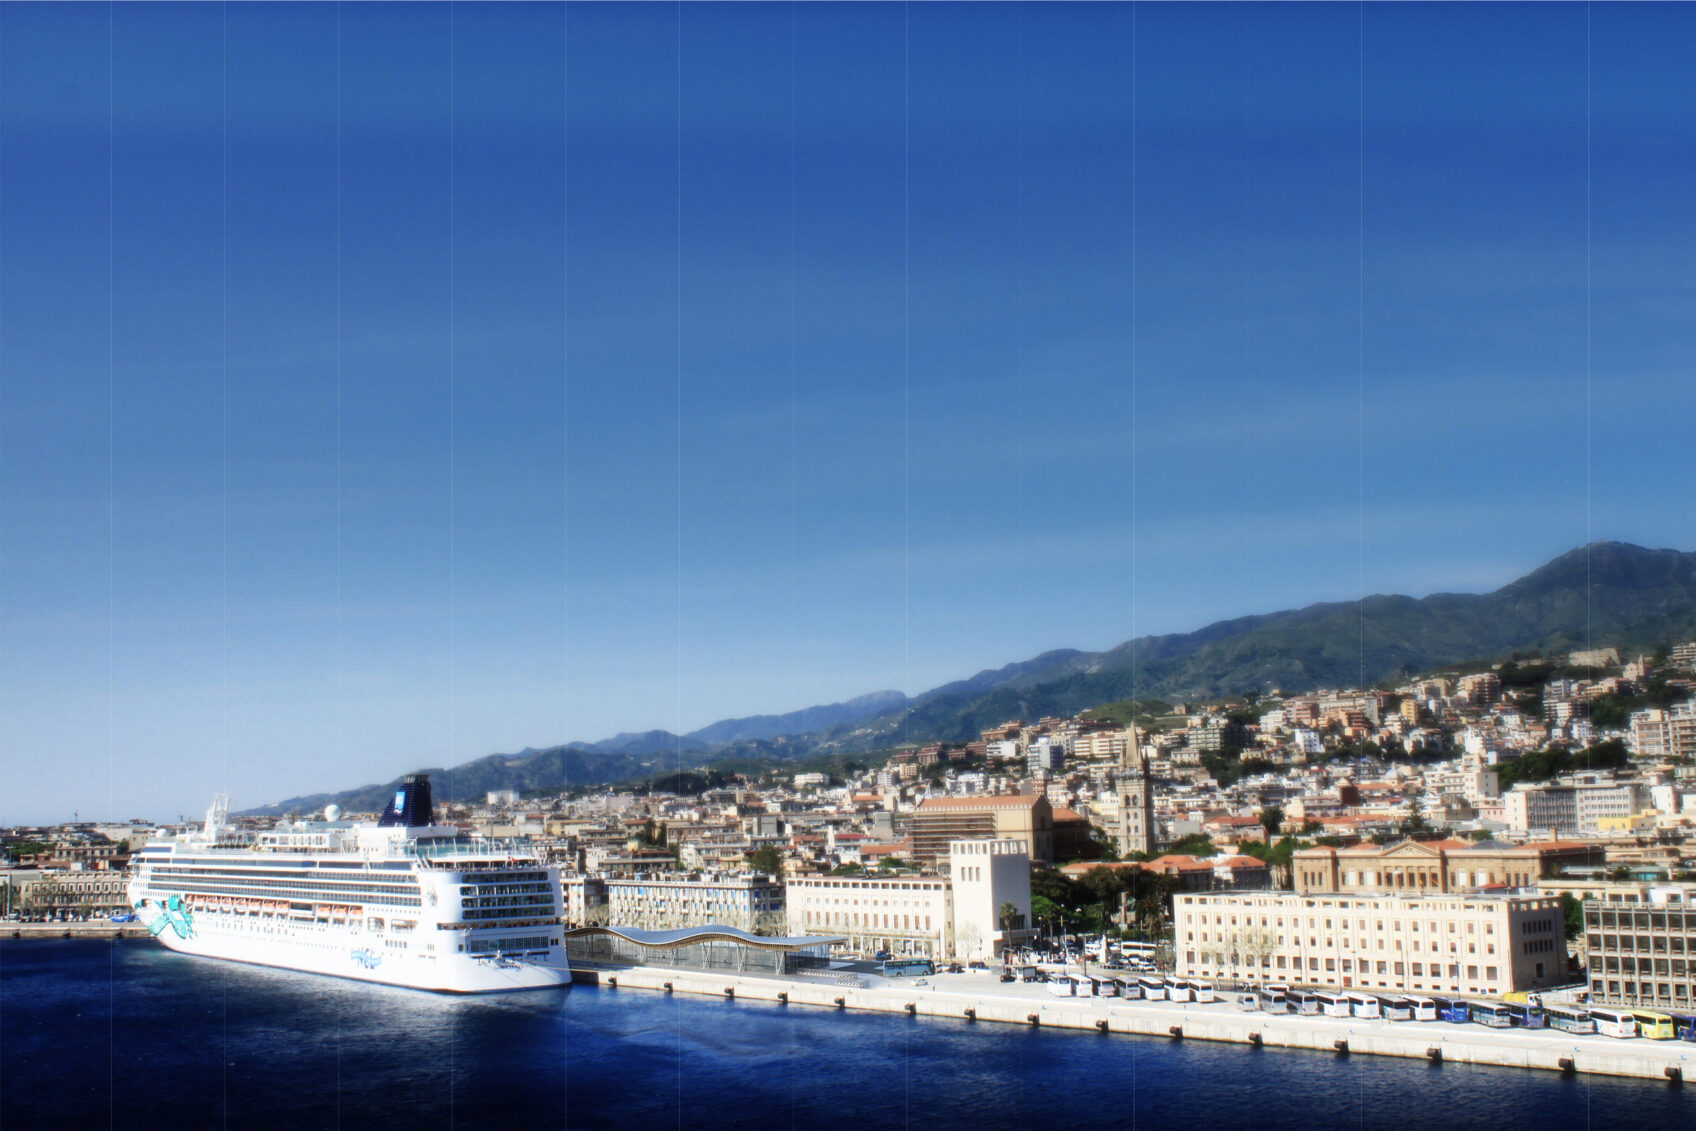 Render new passenger terminal at the Port of Messina as seen from the sea